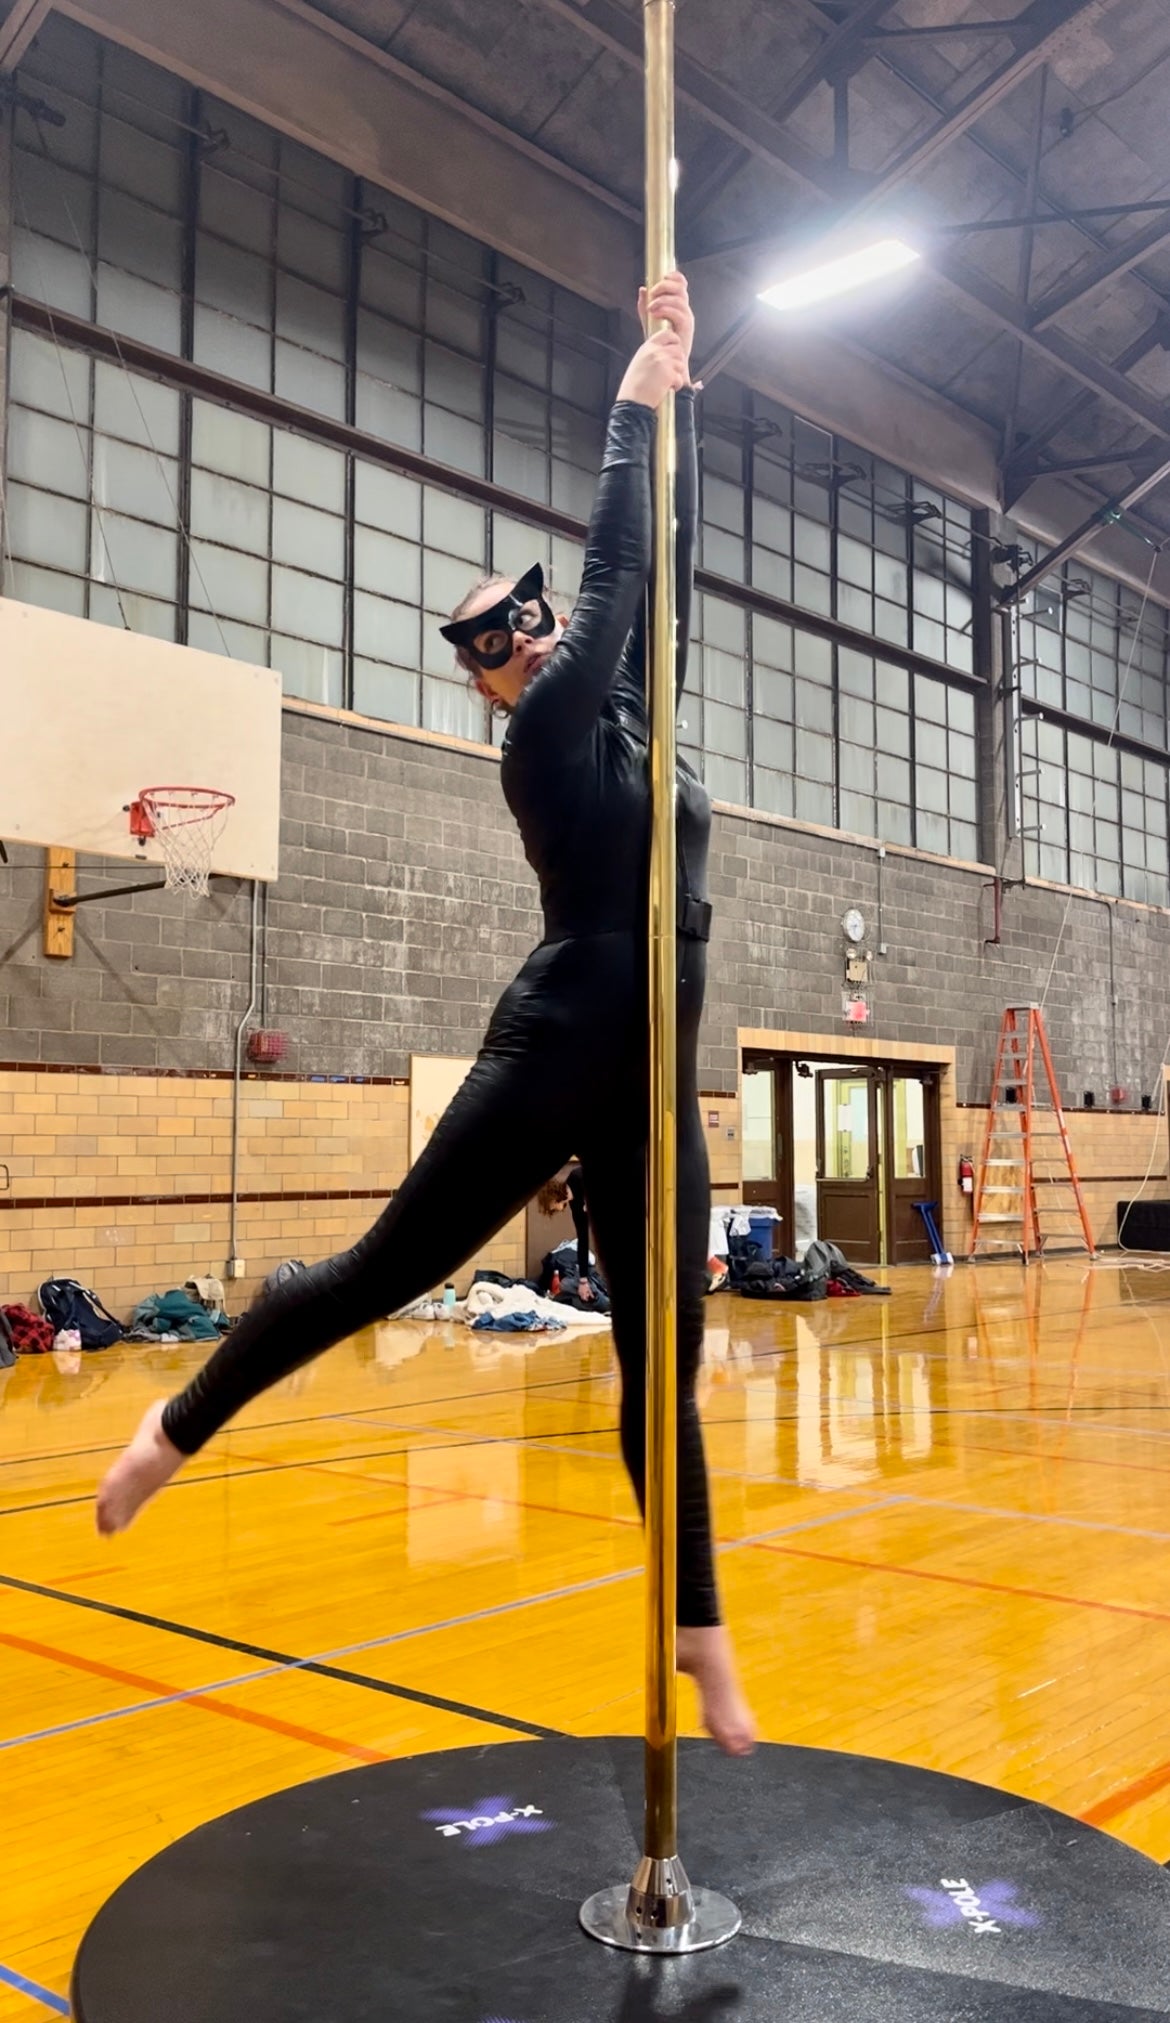 Natalie dancing on the pole in a Catwoman costume